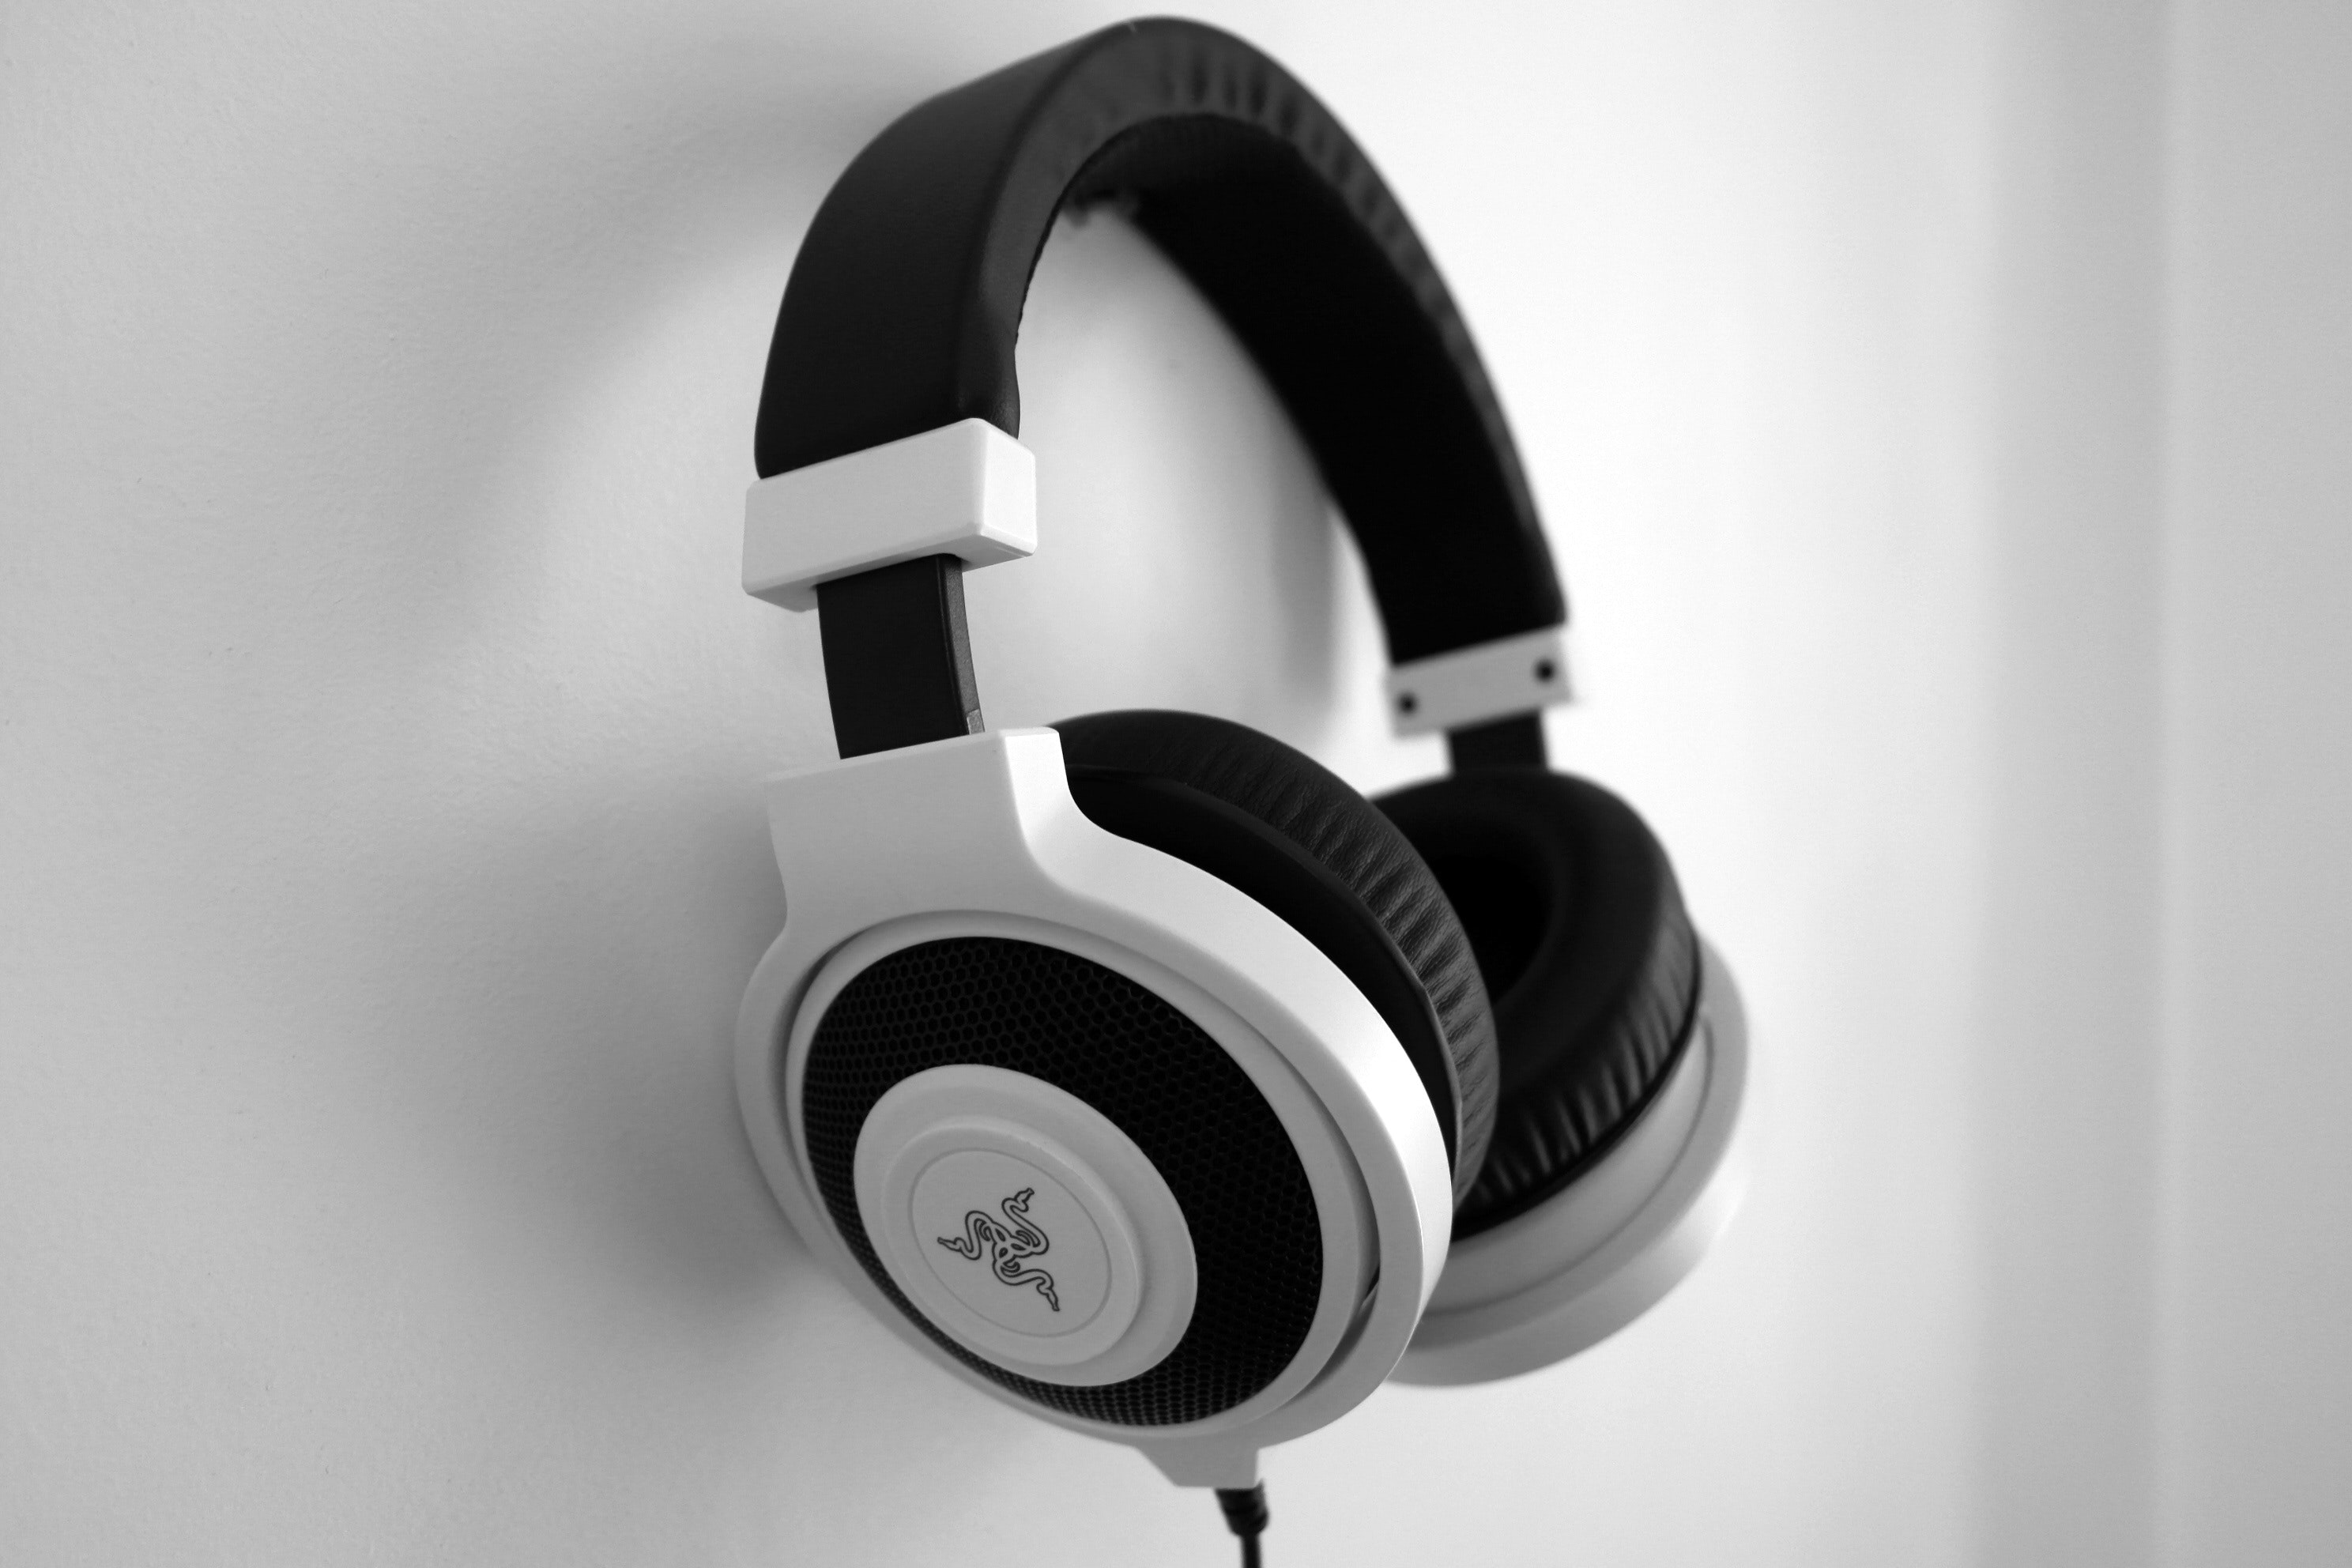 Black and White Razer Gaming Headset Hanging on White Painted Wall ...